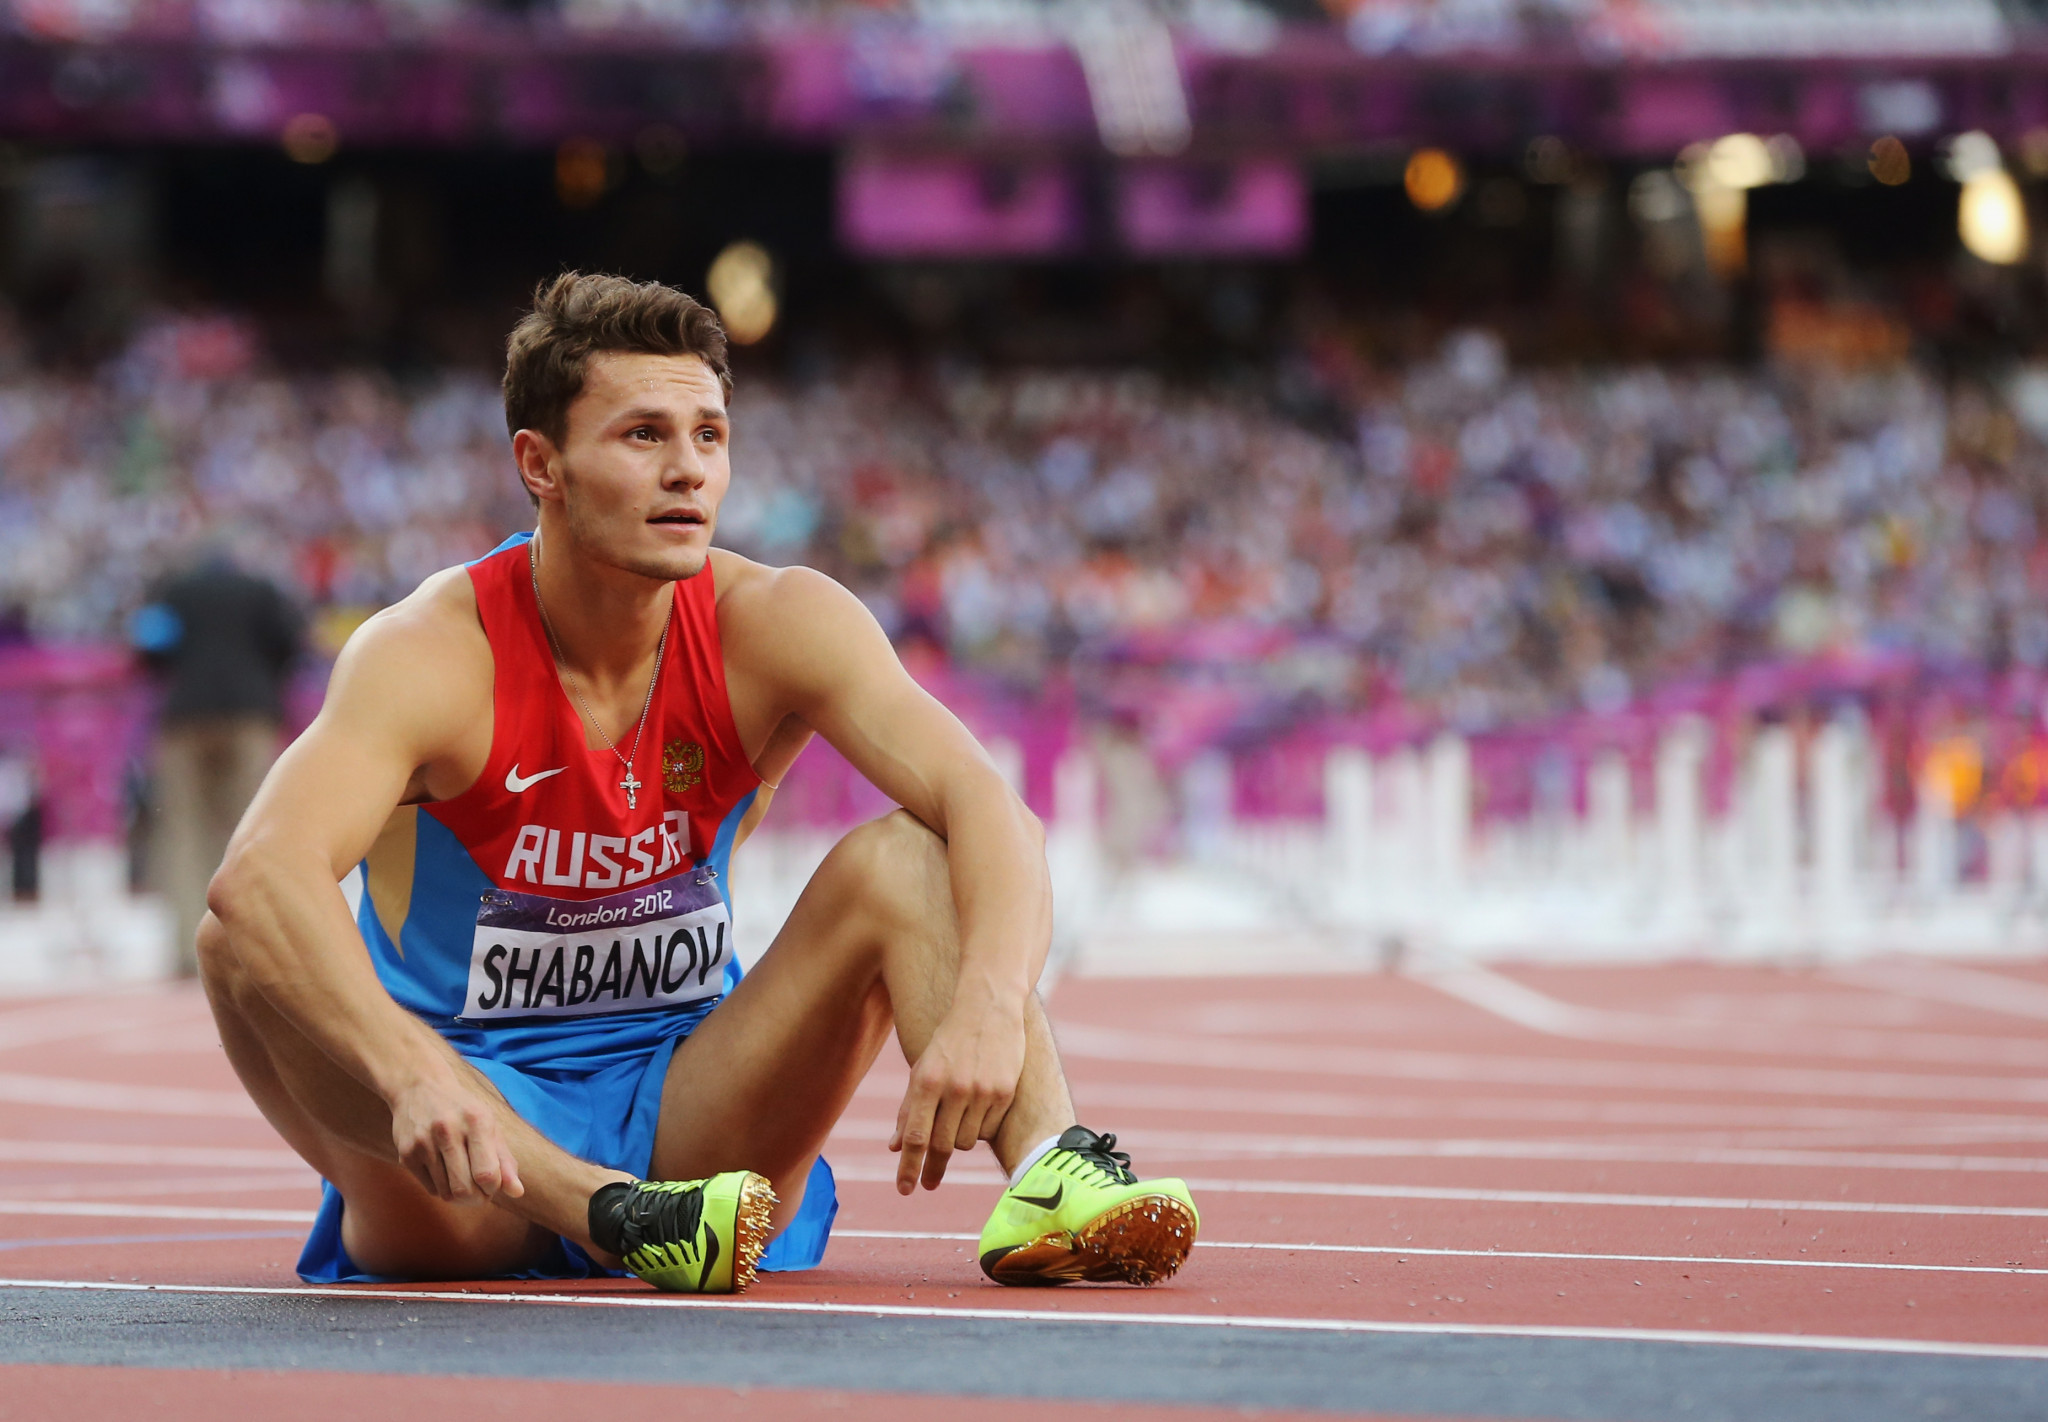 Konstantin Shabanov, who competed at London 2012, is one of the 33 further Russians granted ANA status ©Getty Images